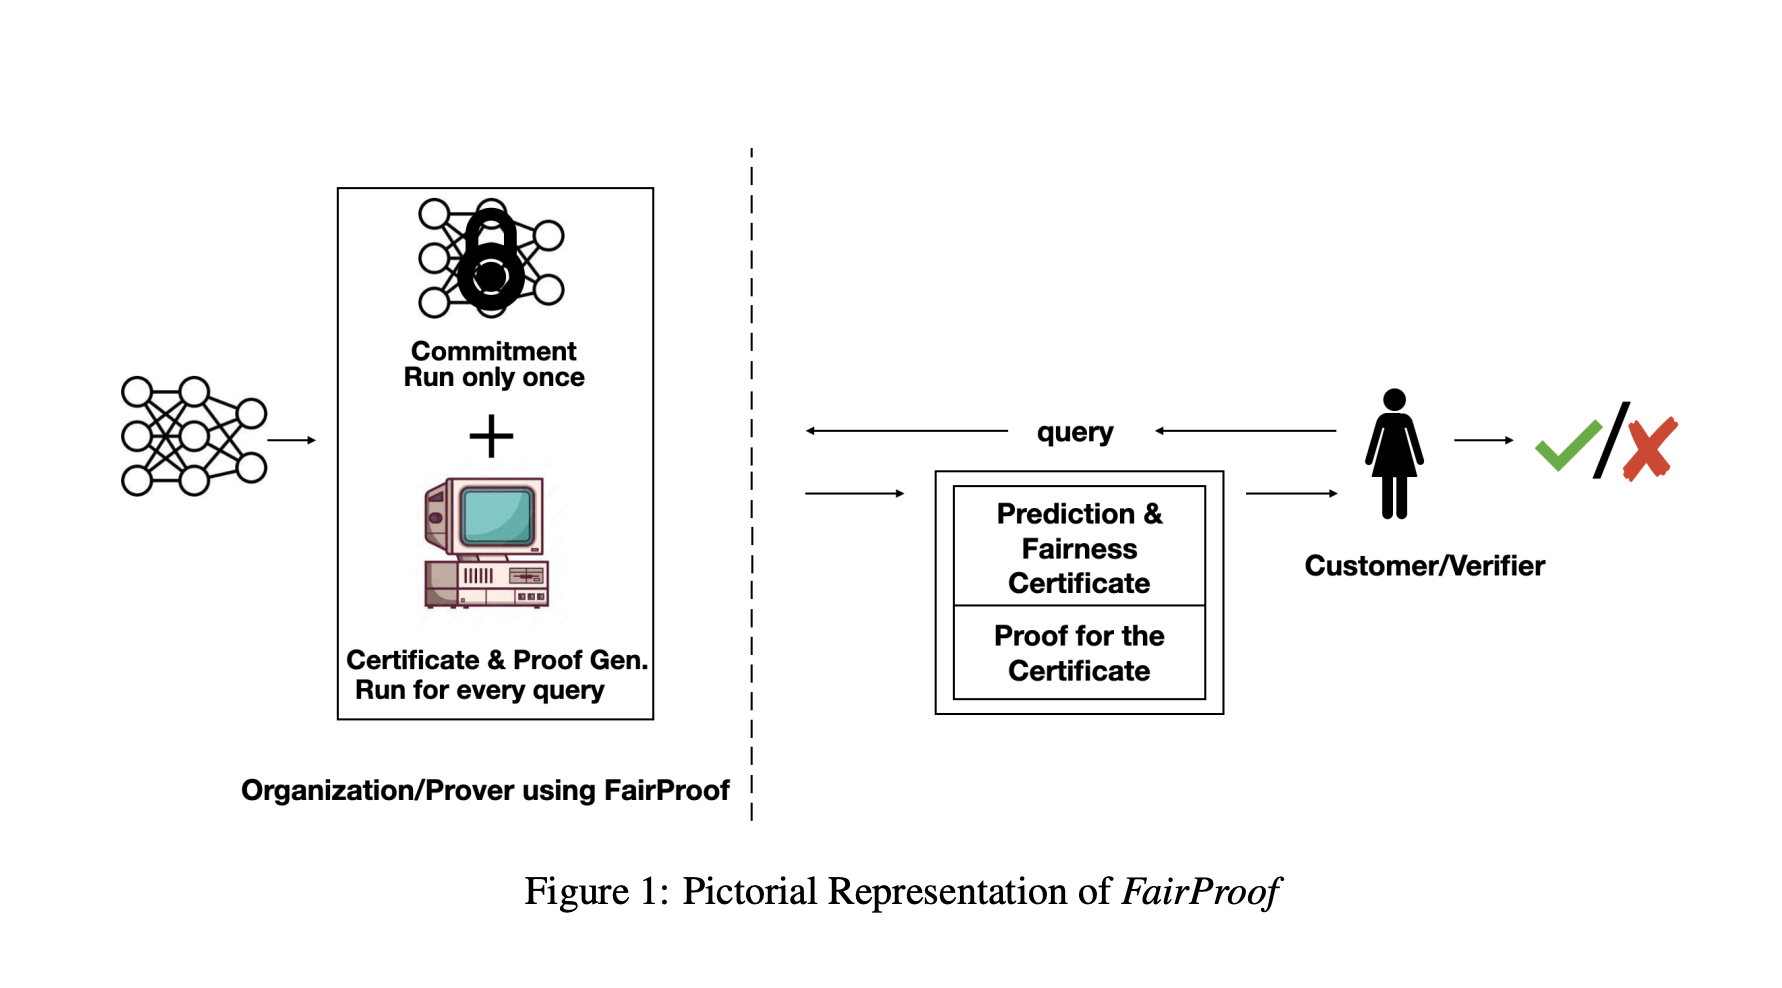  FairProof: An AI System that Uses Zero-Knowledge Proofs to Publicly Verify the Fairness of a Model while Maintaining Confidentiality